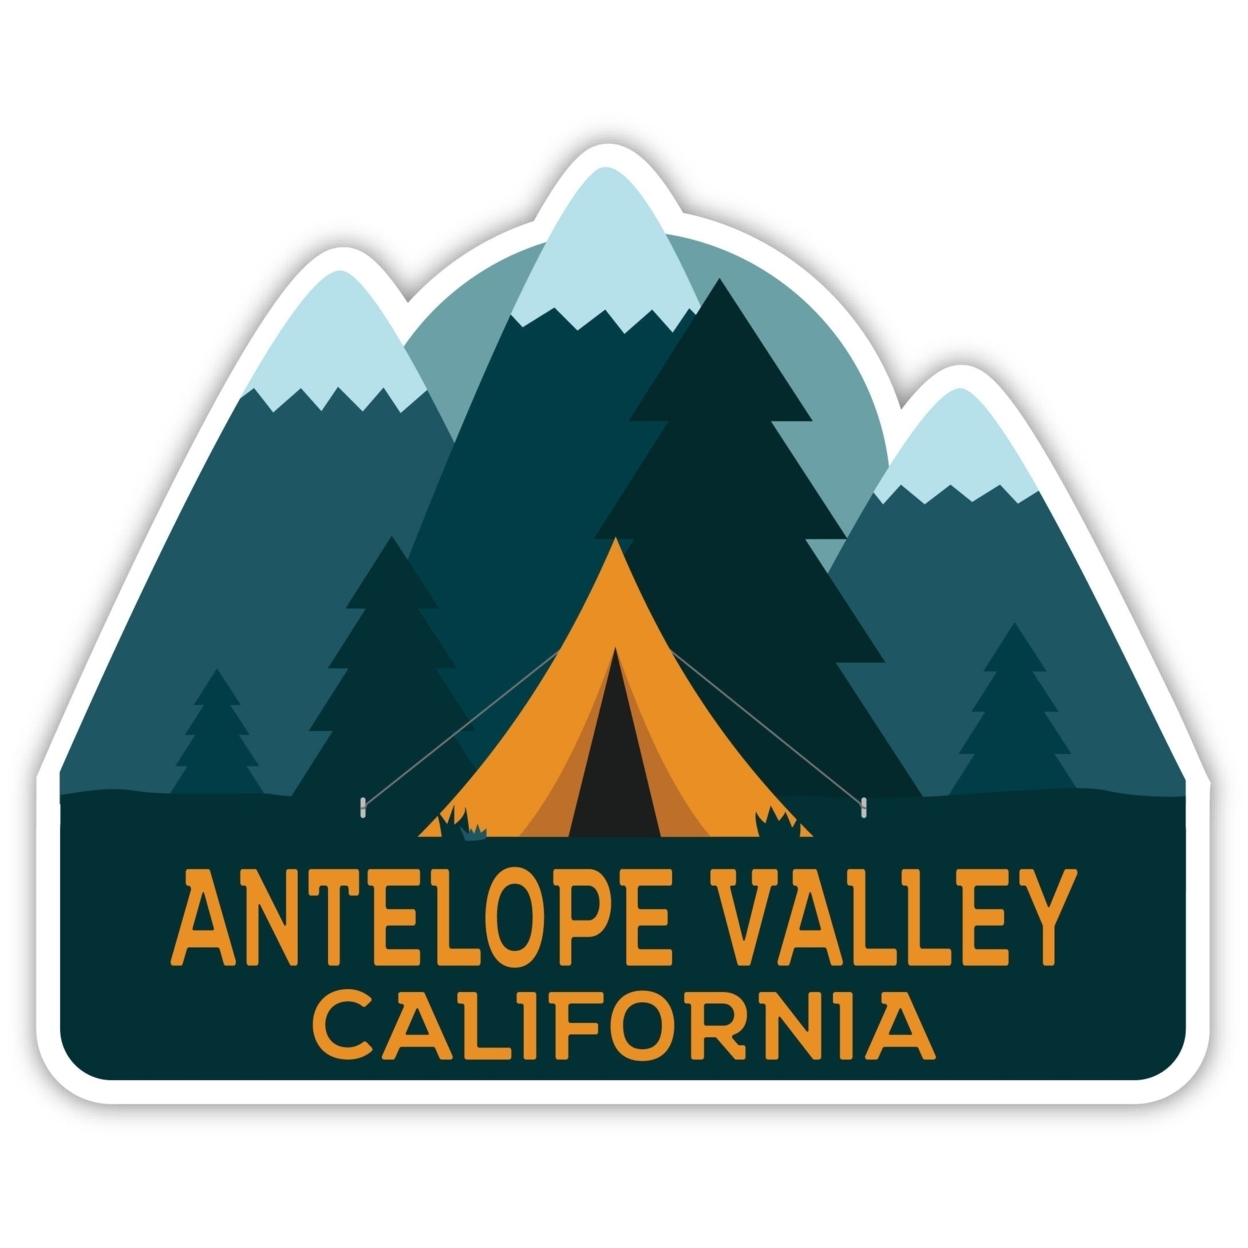 Antelope Valley California Souvenir Decorative Stickers (Choose Theme And Size) - Single Unit, 2-Inch, Tent